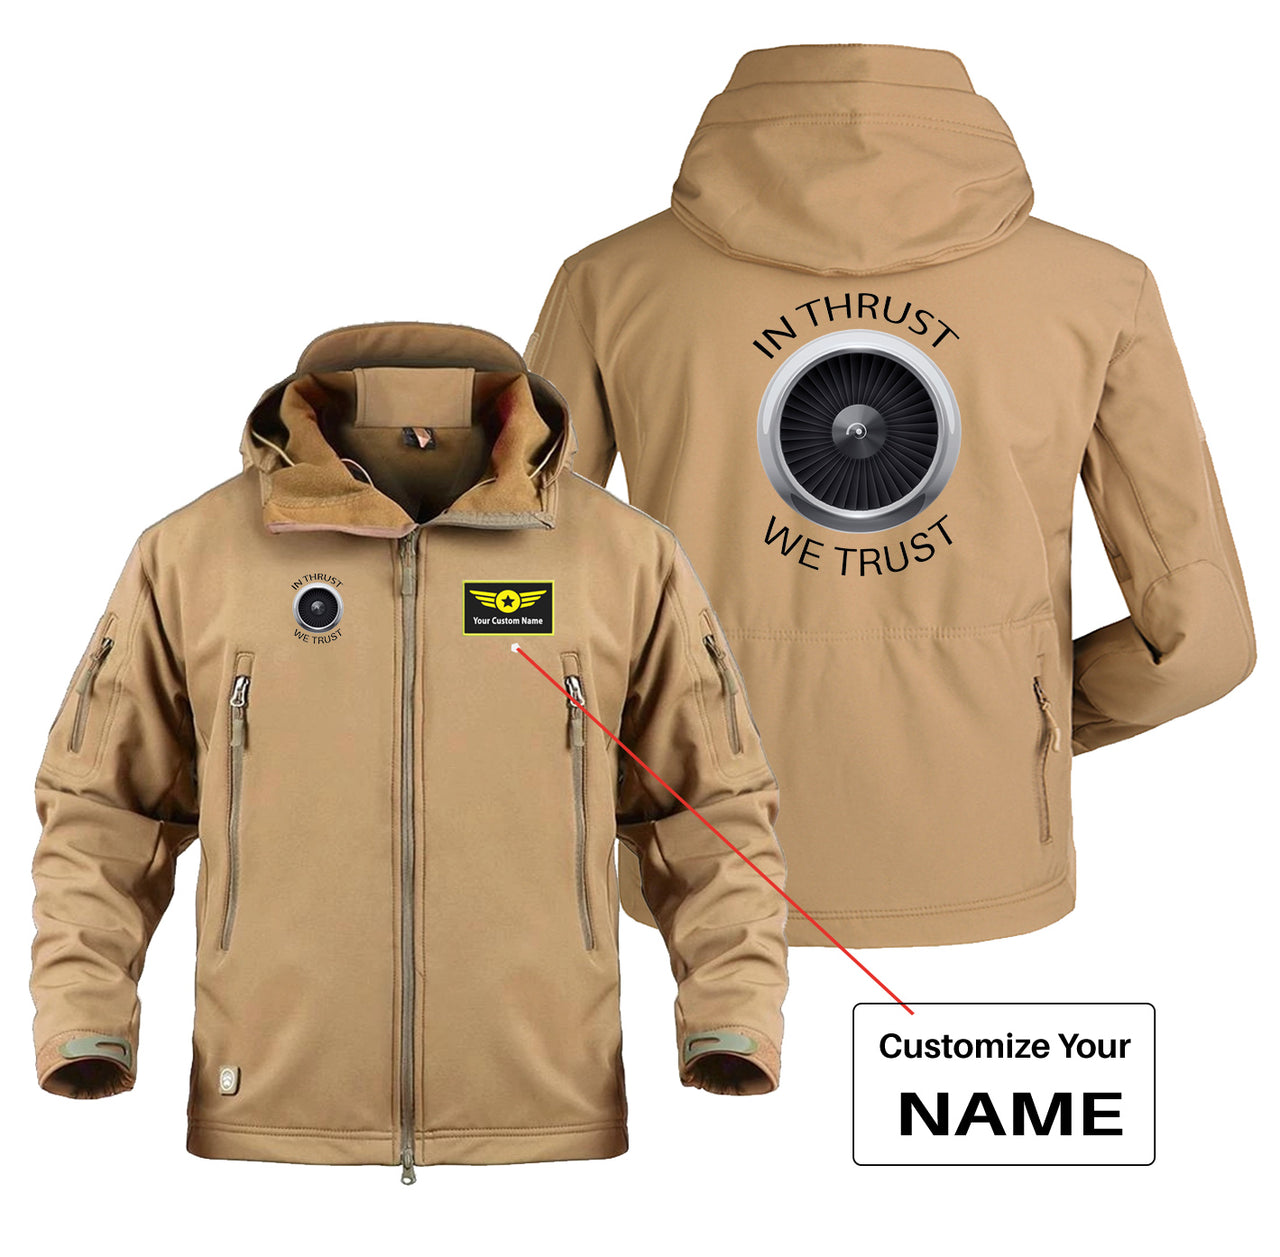 In Thrust We Trust Designed Military Jackets (Customizable)